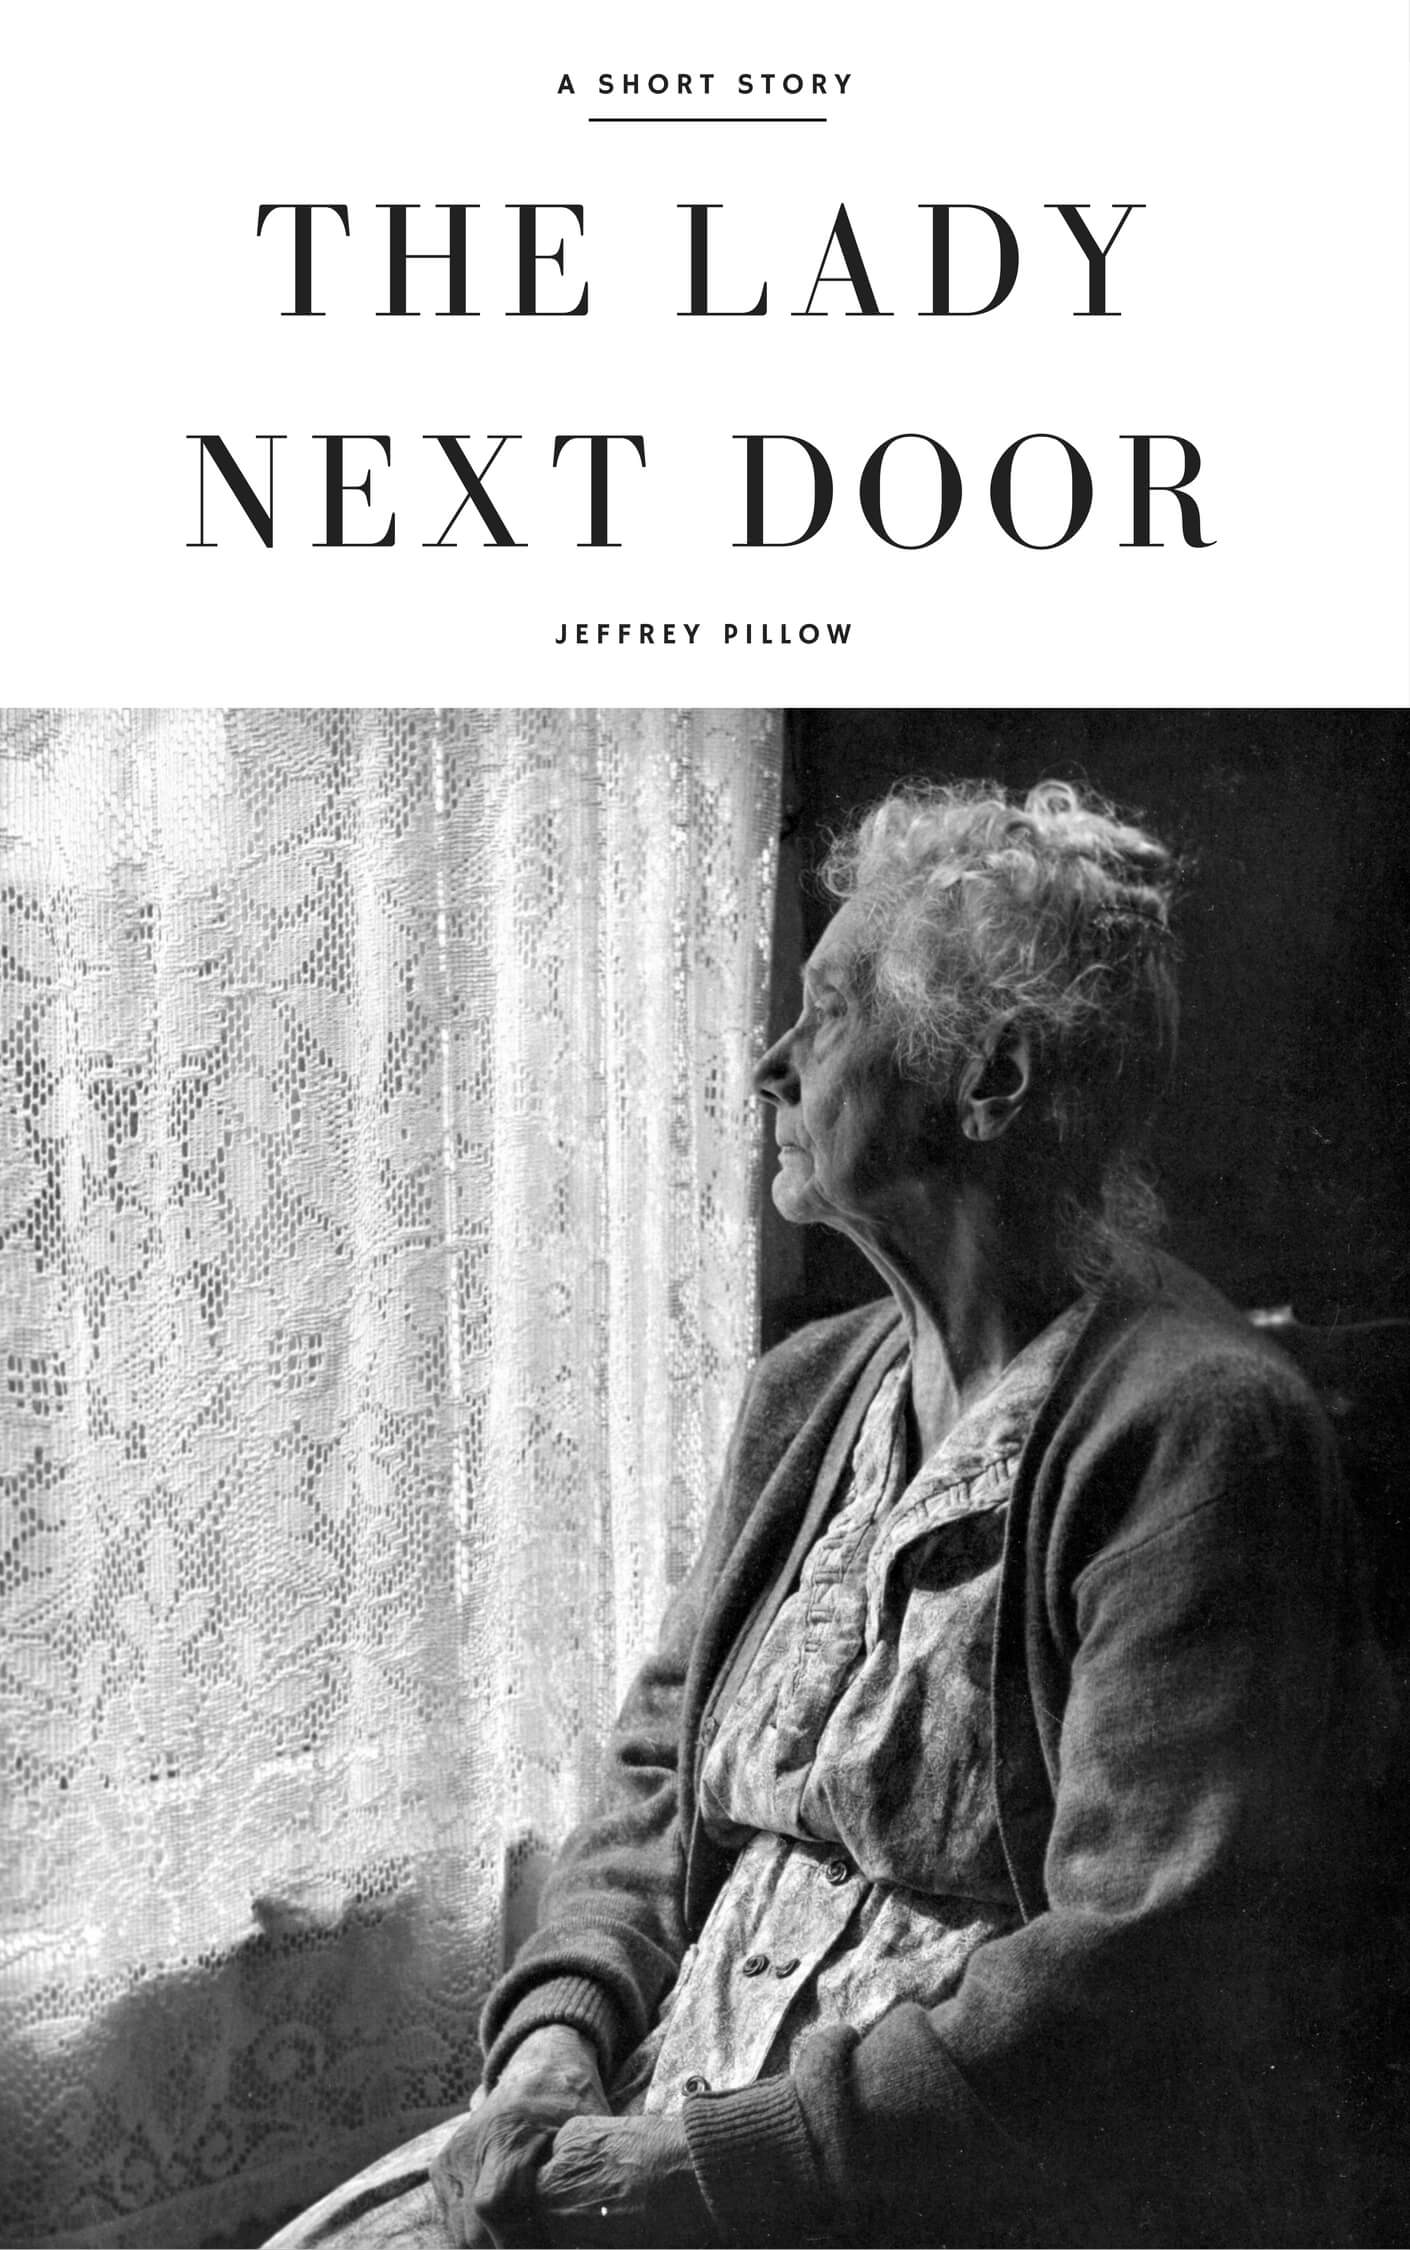 the lady next door, a short story by jeffrey pillow